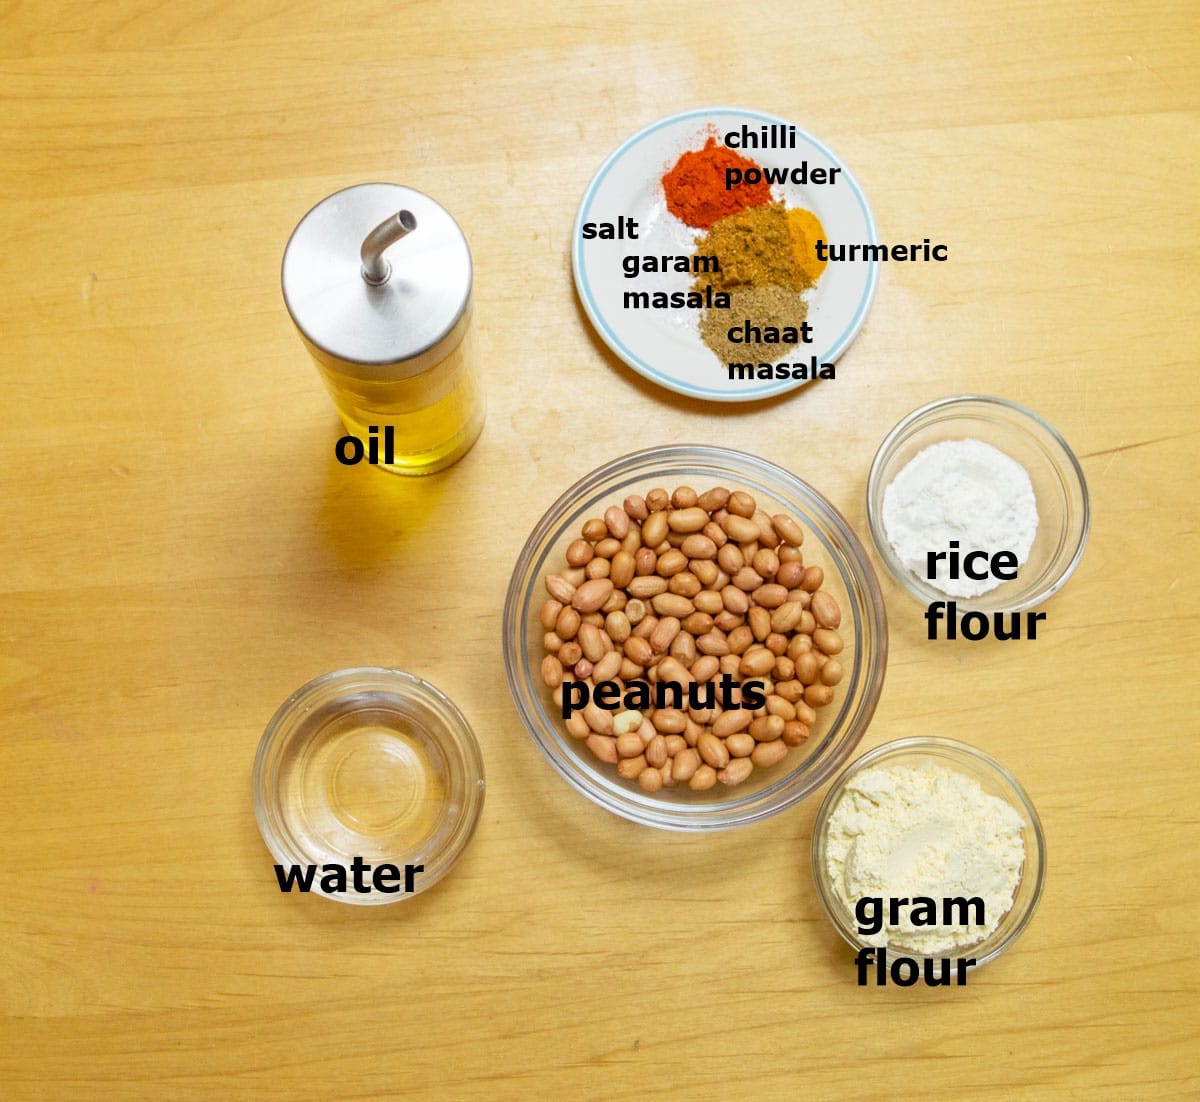 dry spices, peanuts, oil, water and flours placed on a wooden table.